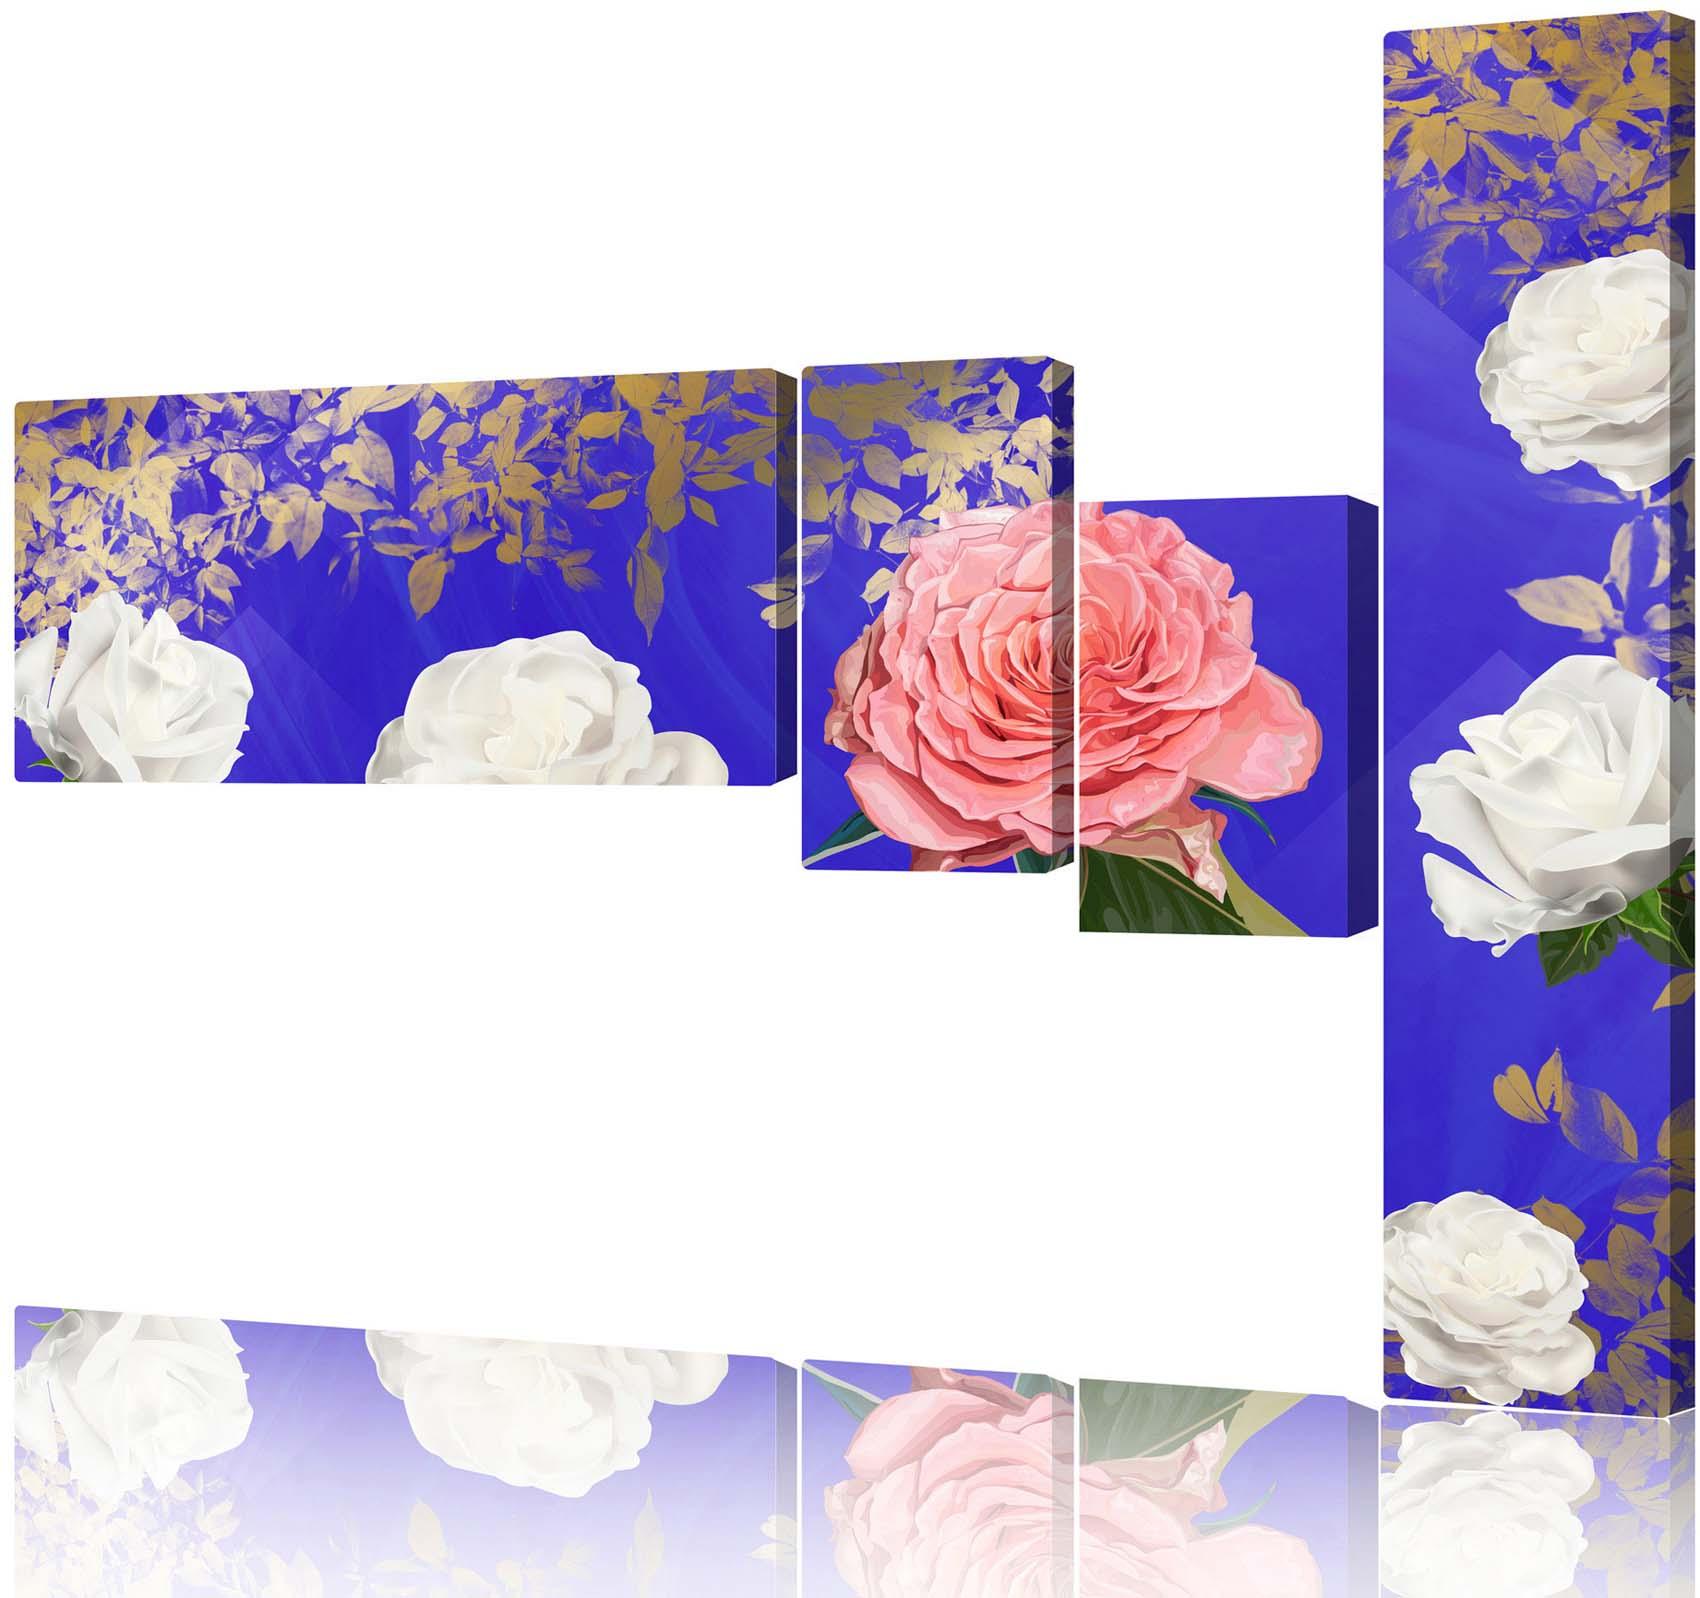 Modular picture - blooming roses on a purple background